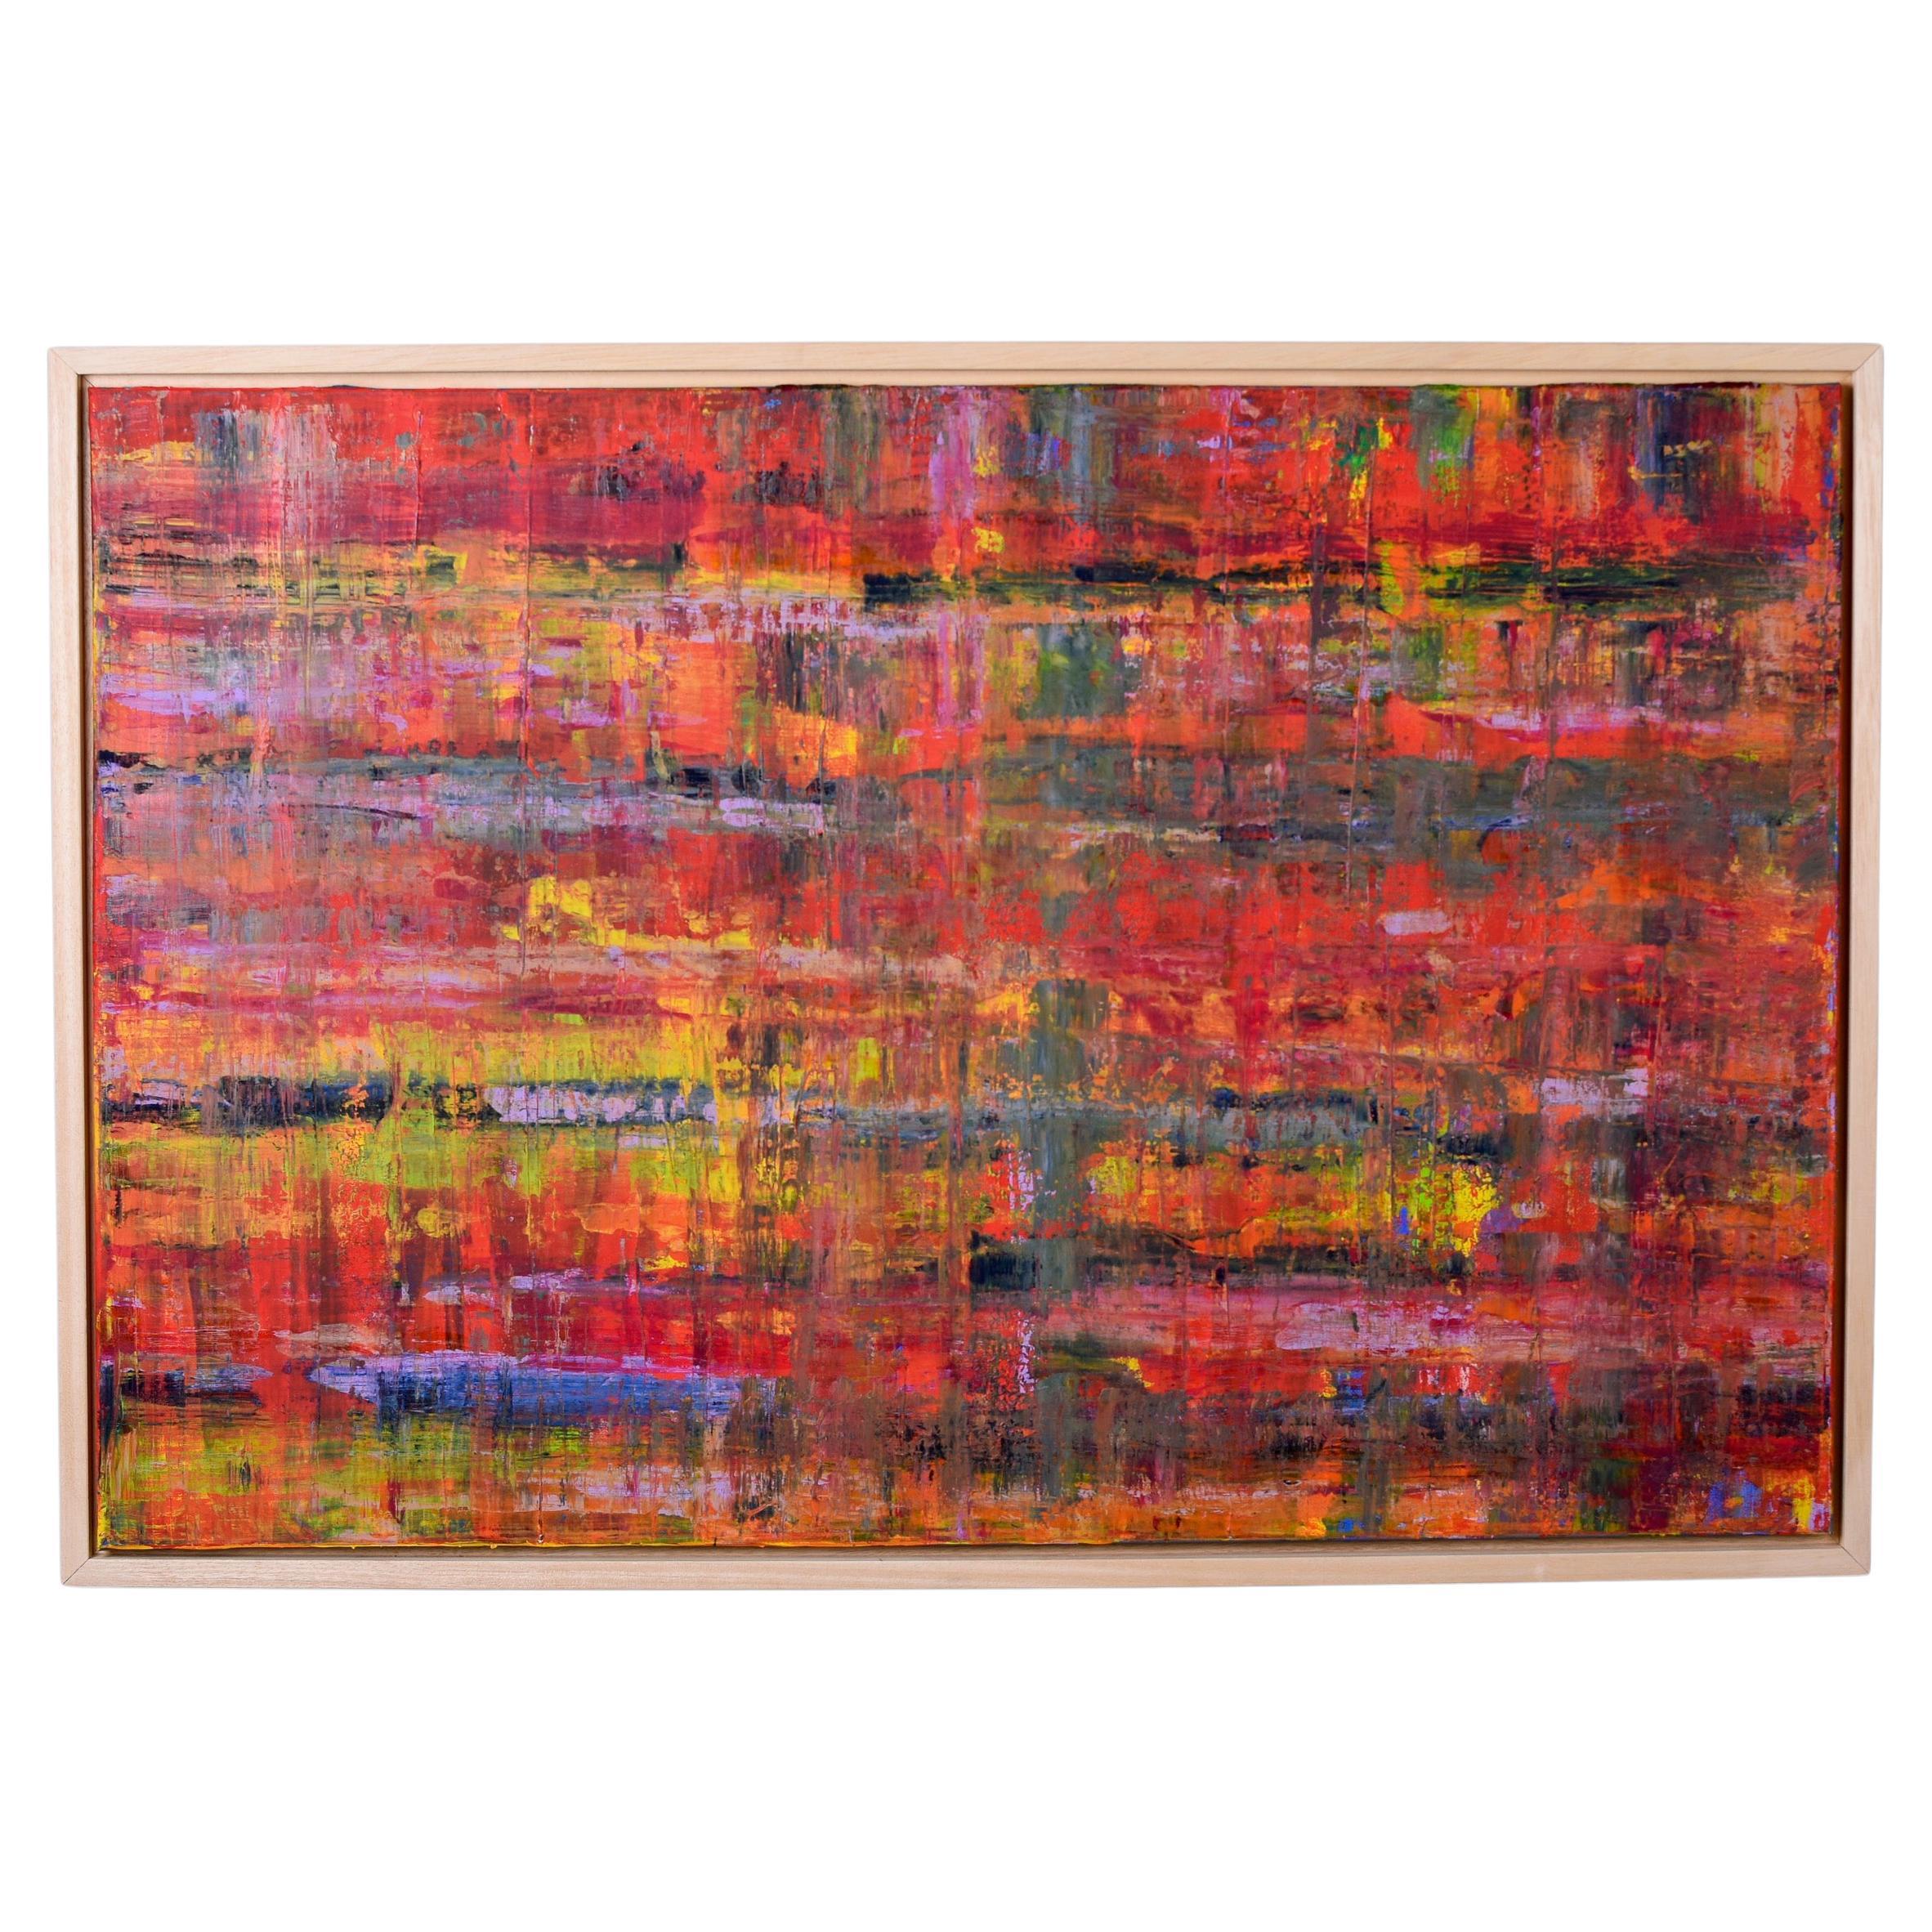 Large Multi Color Abstract Acrylic Painting on Canvas